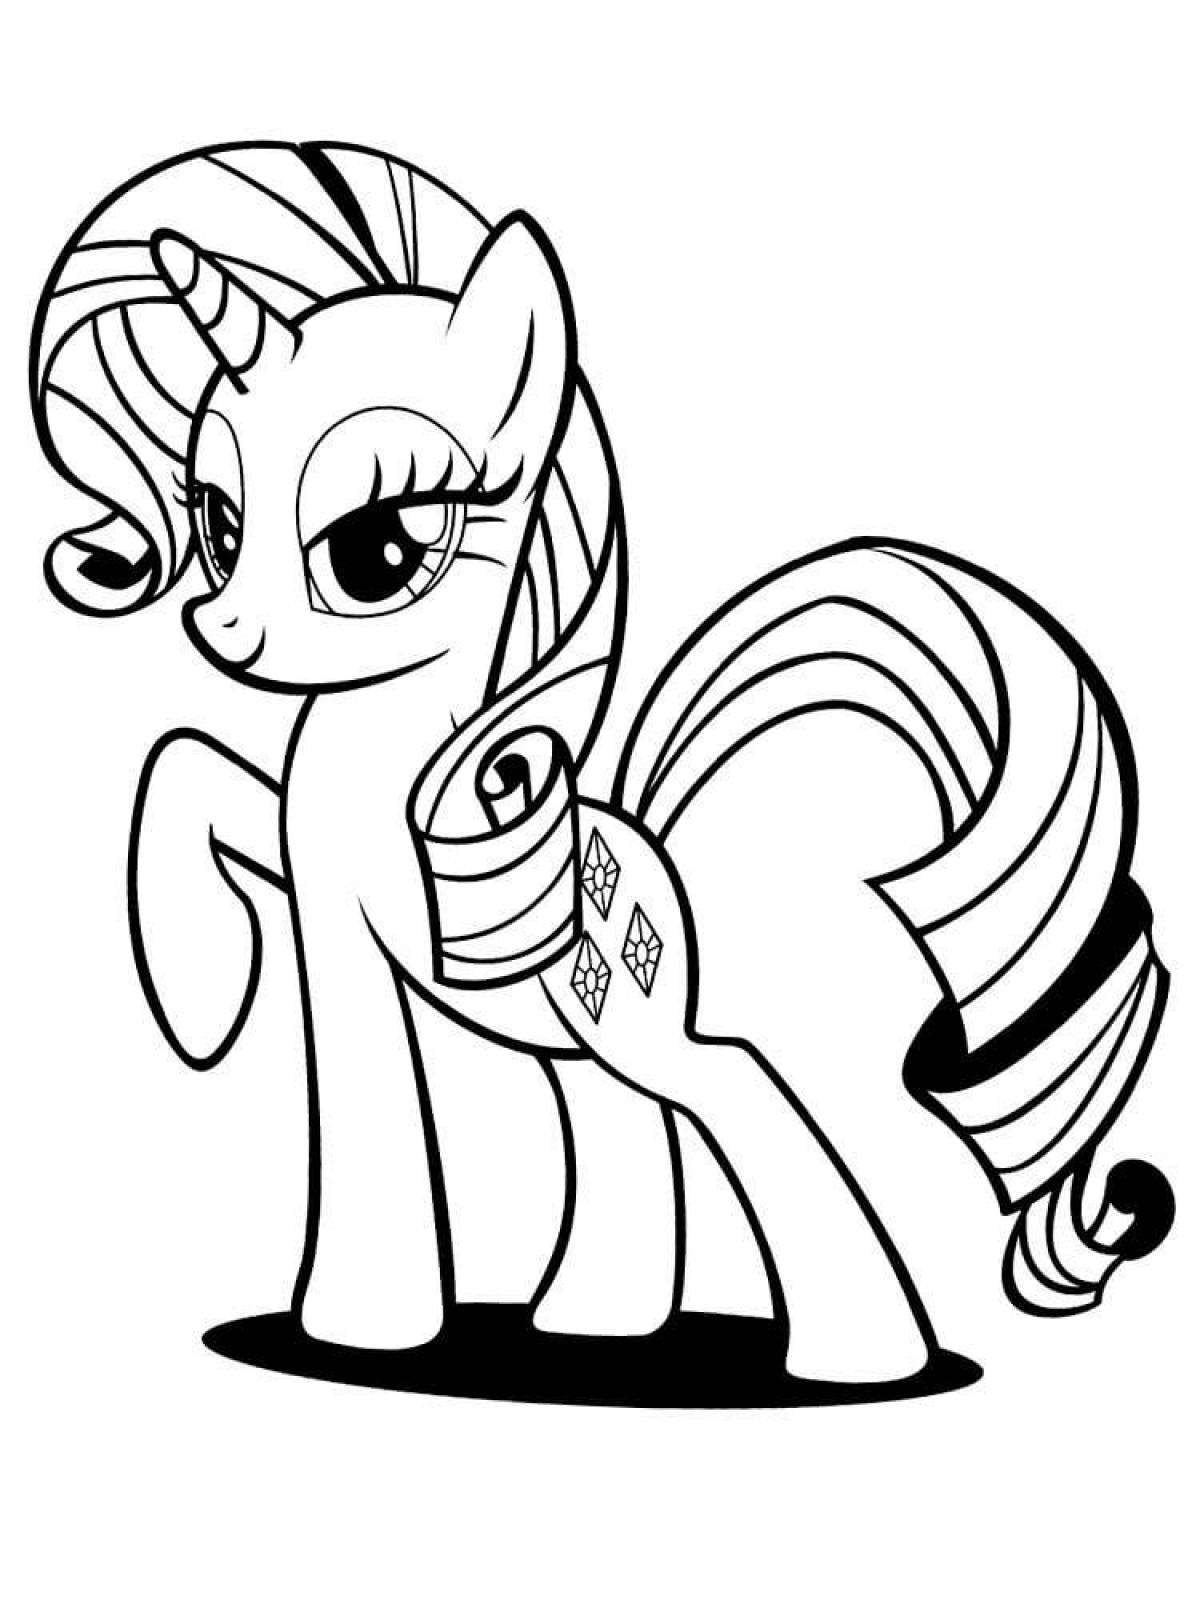 Attractive pony coloring for kids